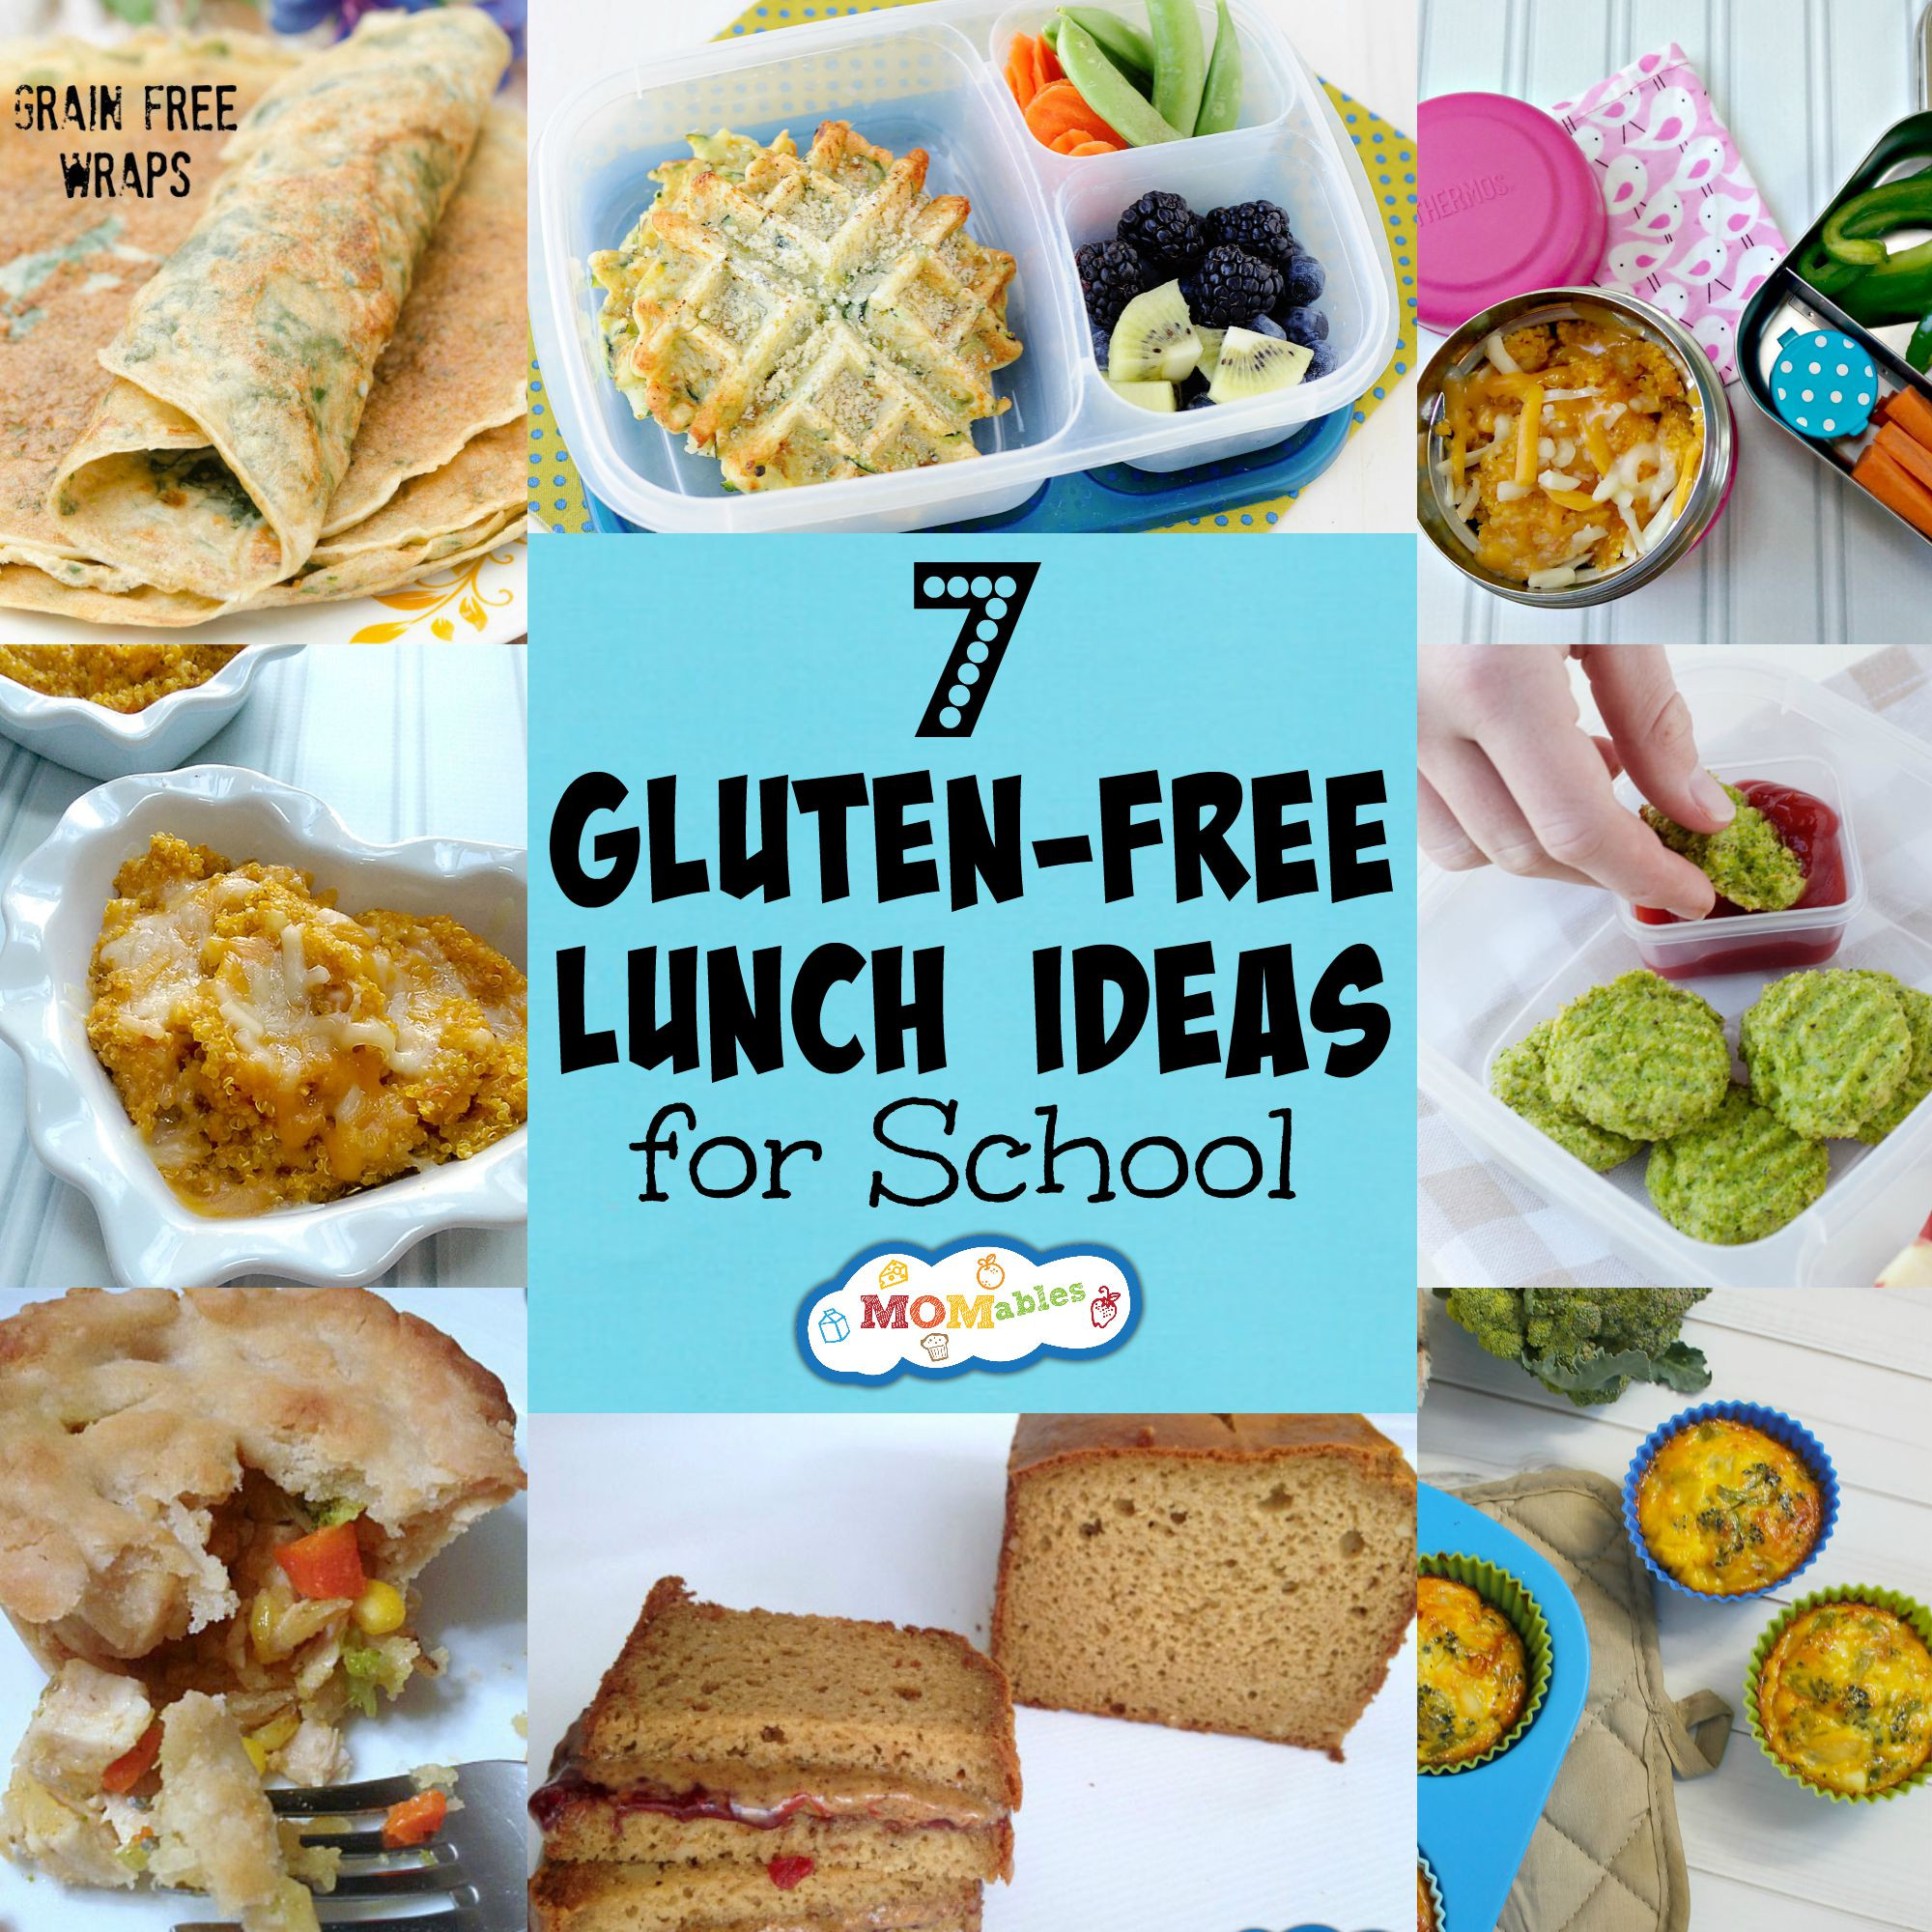 Healthy Gluten Free Lunches
 7 Gluten Free Lunch Ideas for School MOMables